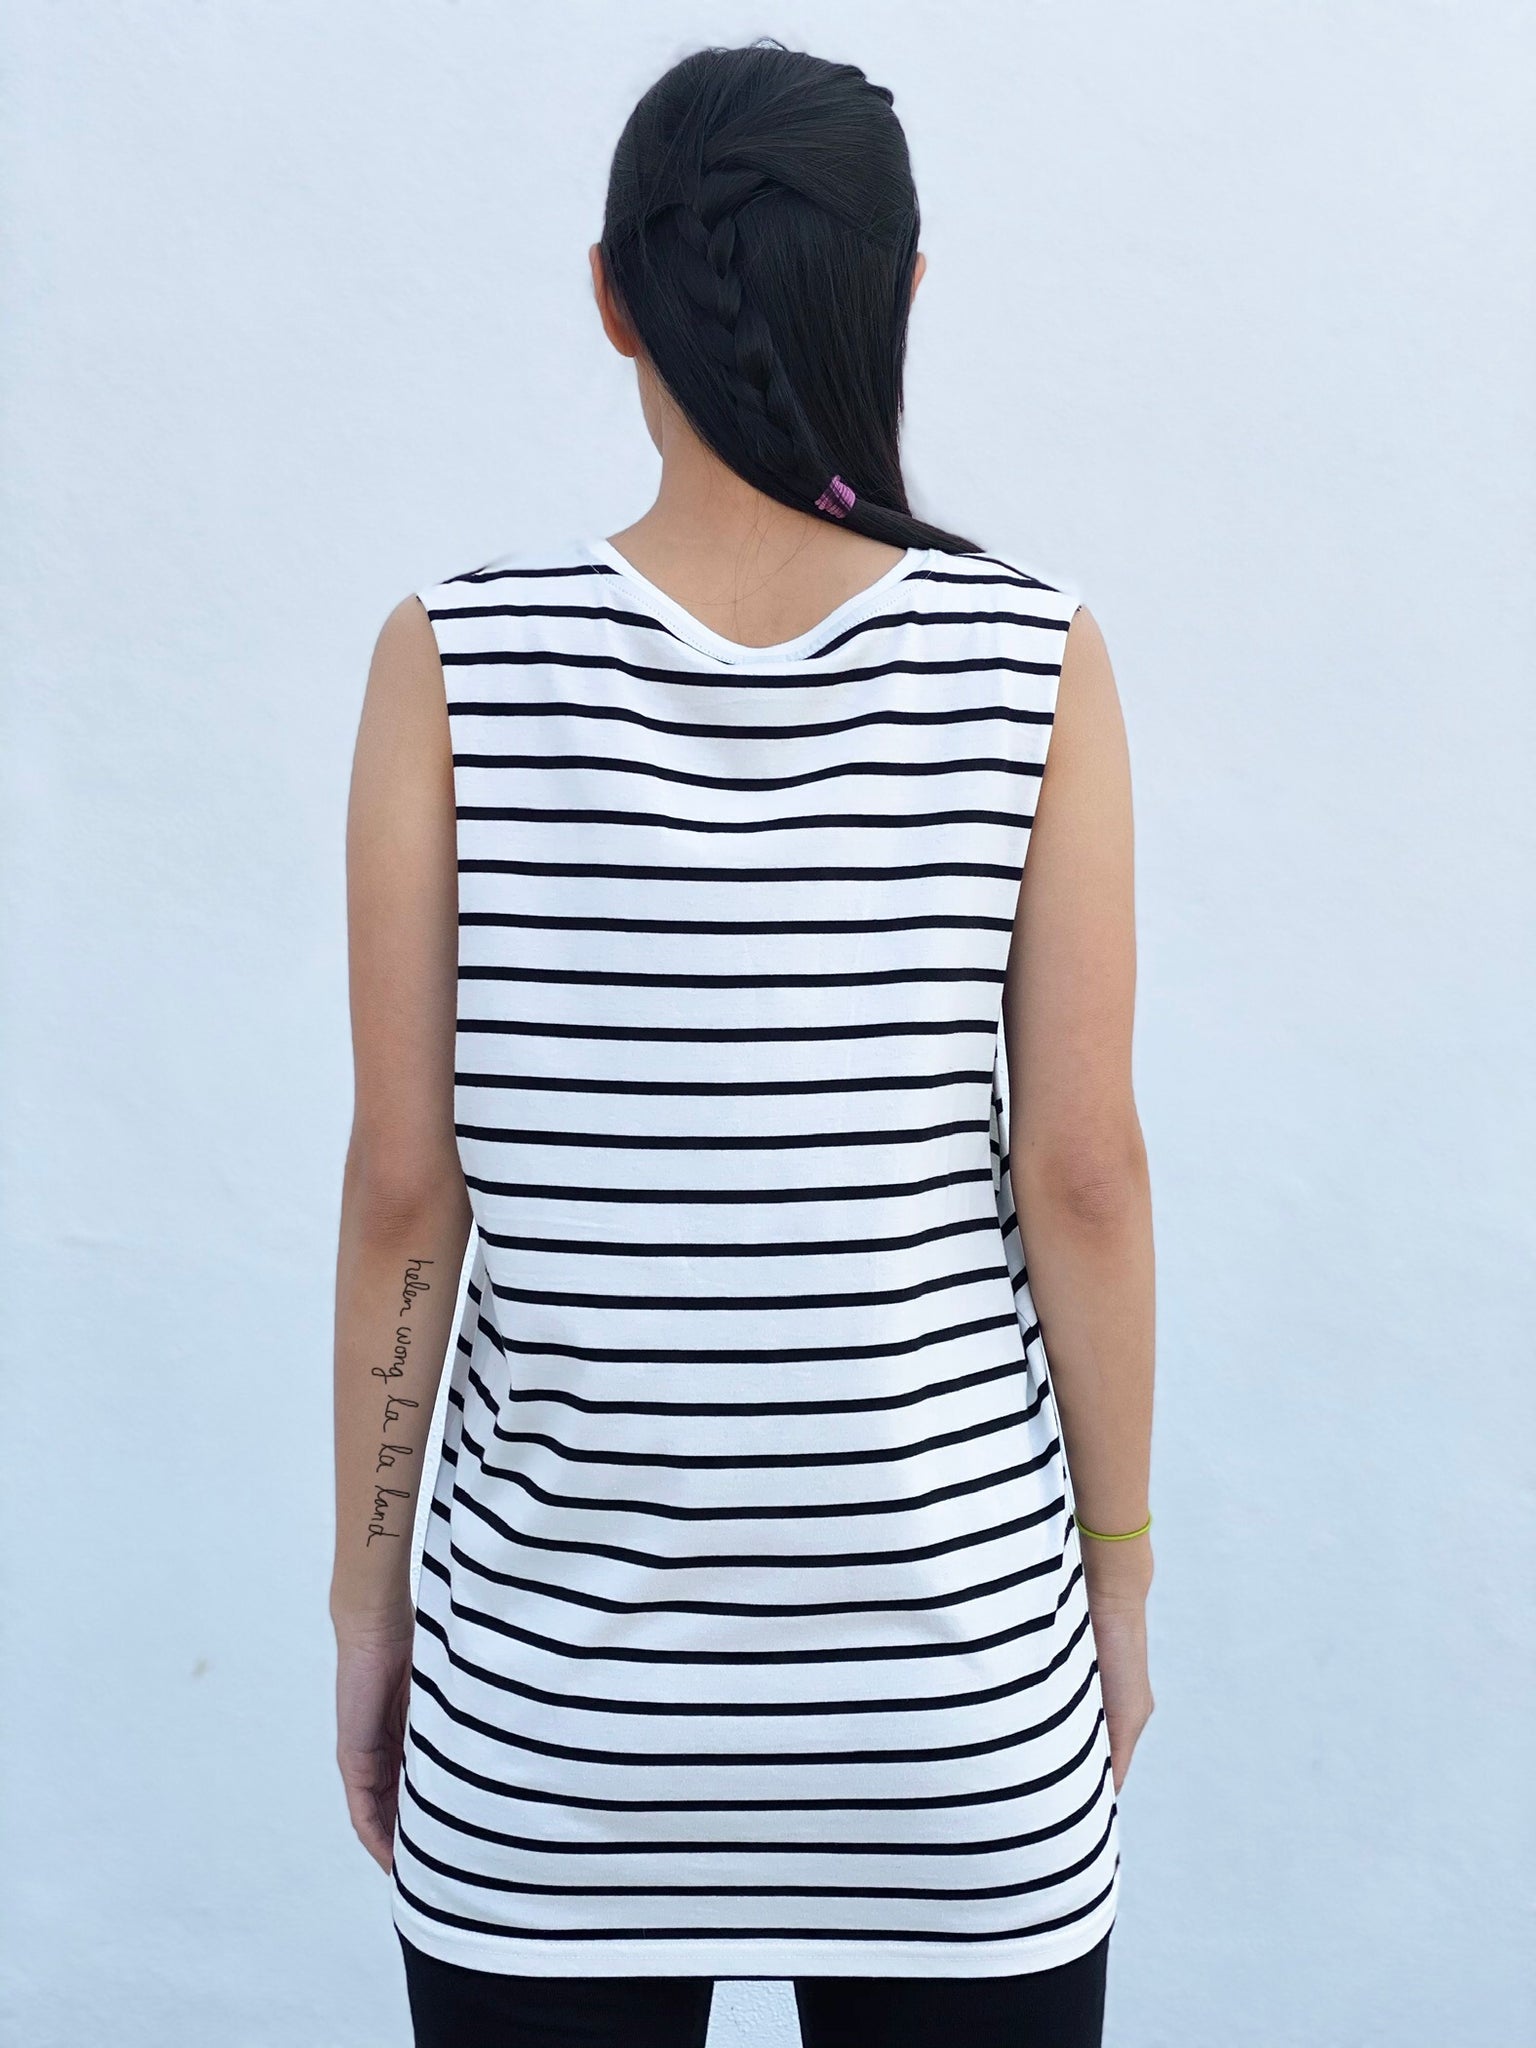 (S/S 2020) Empty All The Cages sleeveless tee in CREAM/BLACK STRIPE